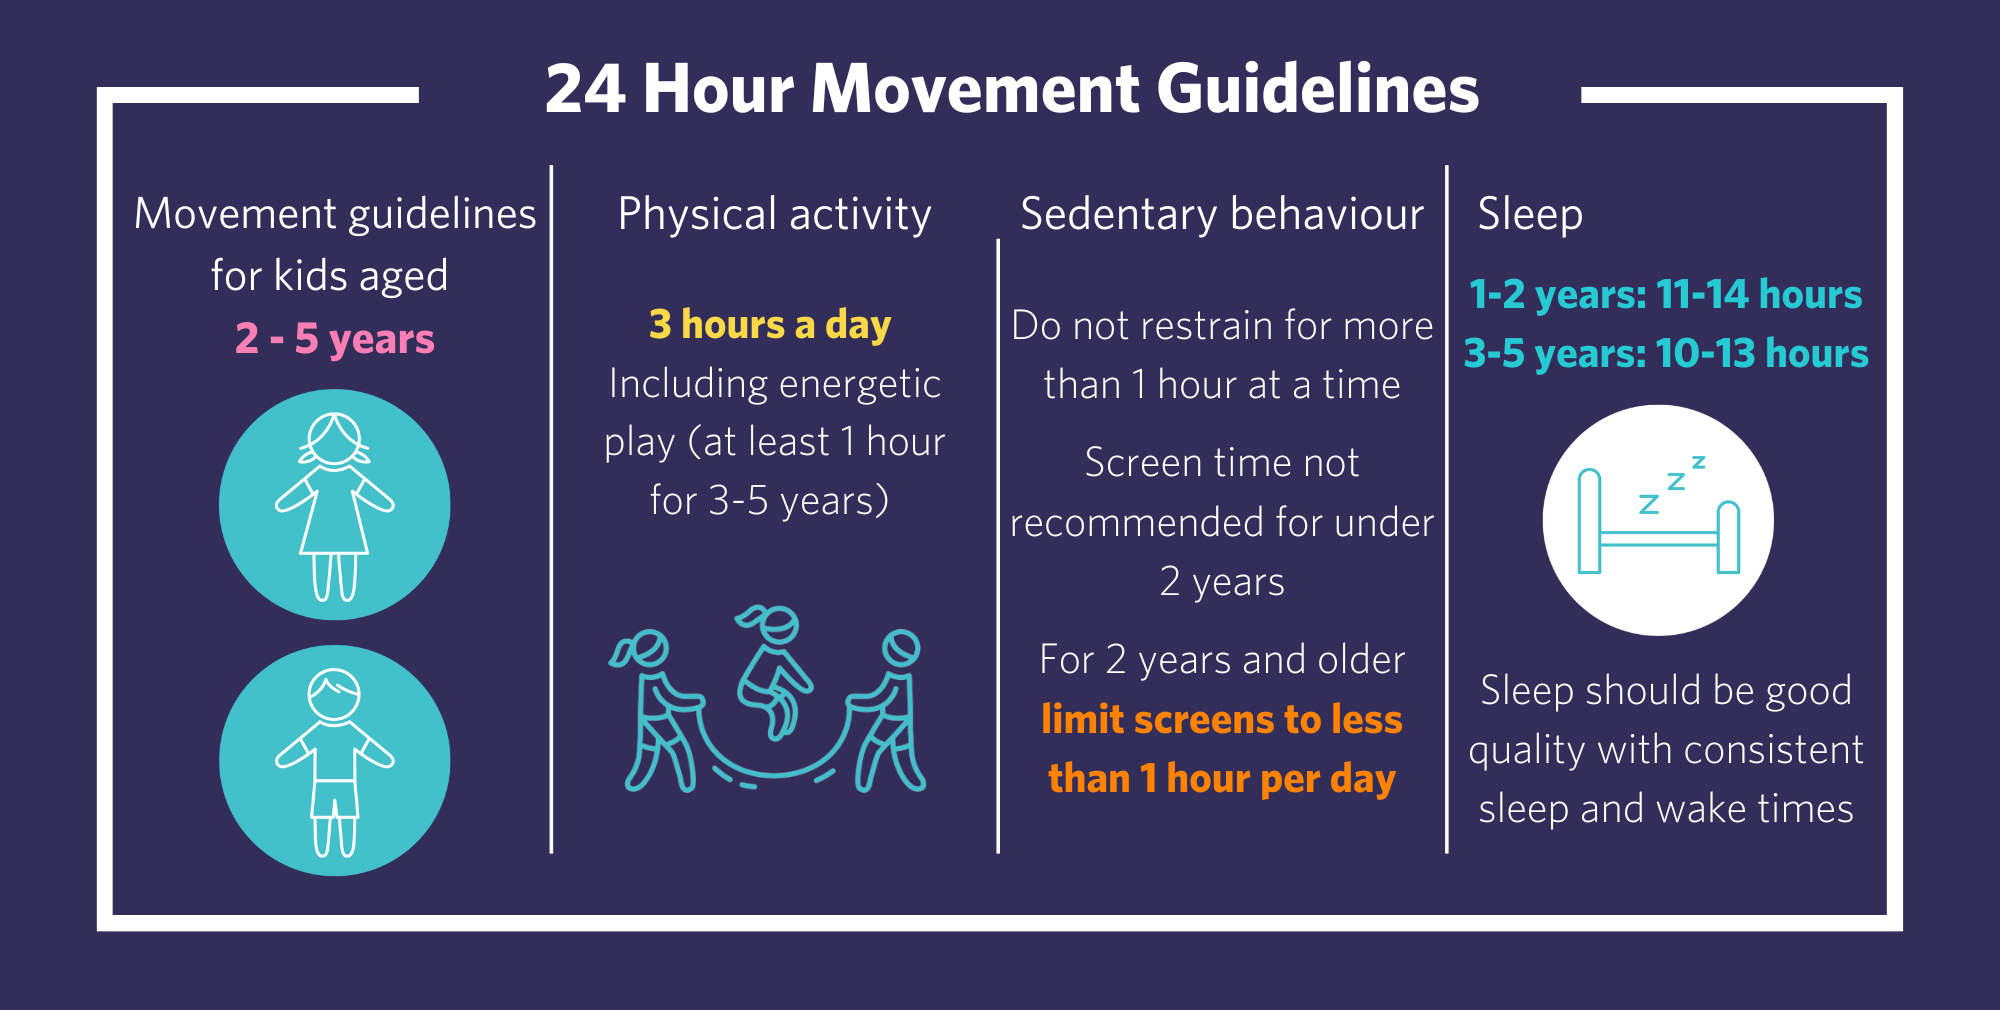 Toddlers 24 Hour Movement Guidelines